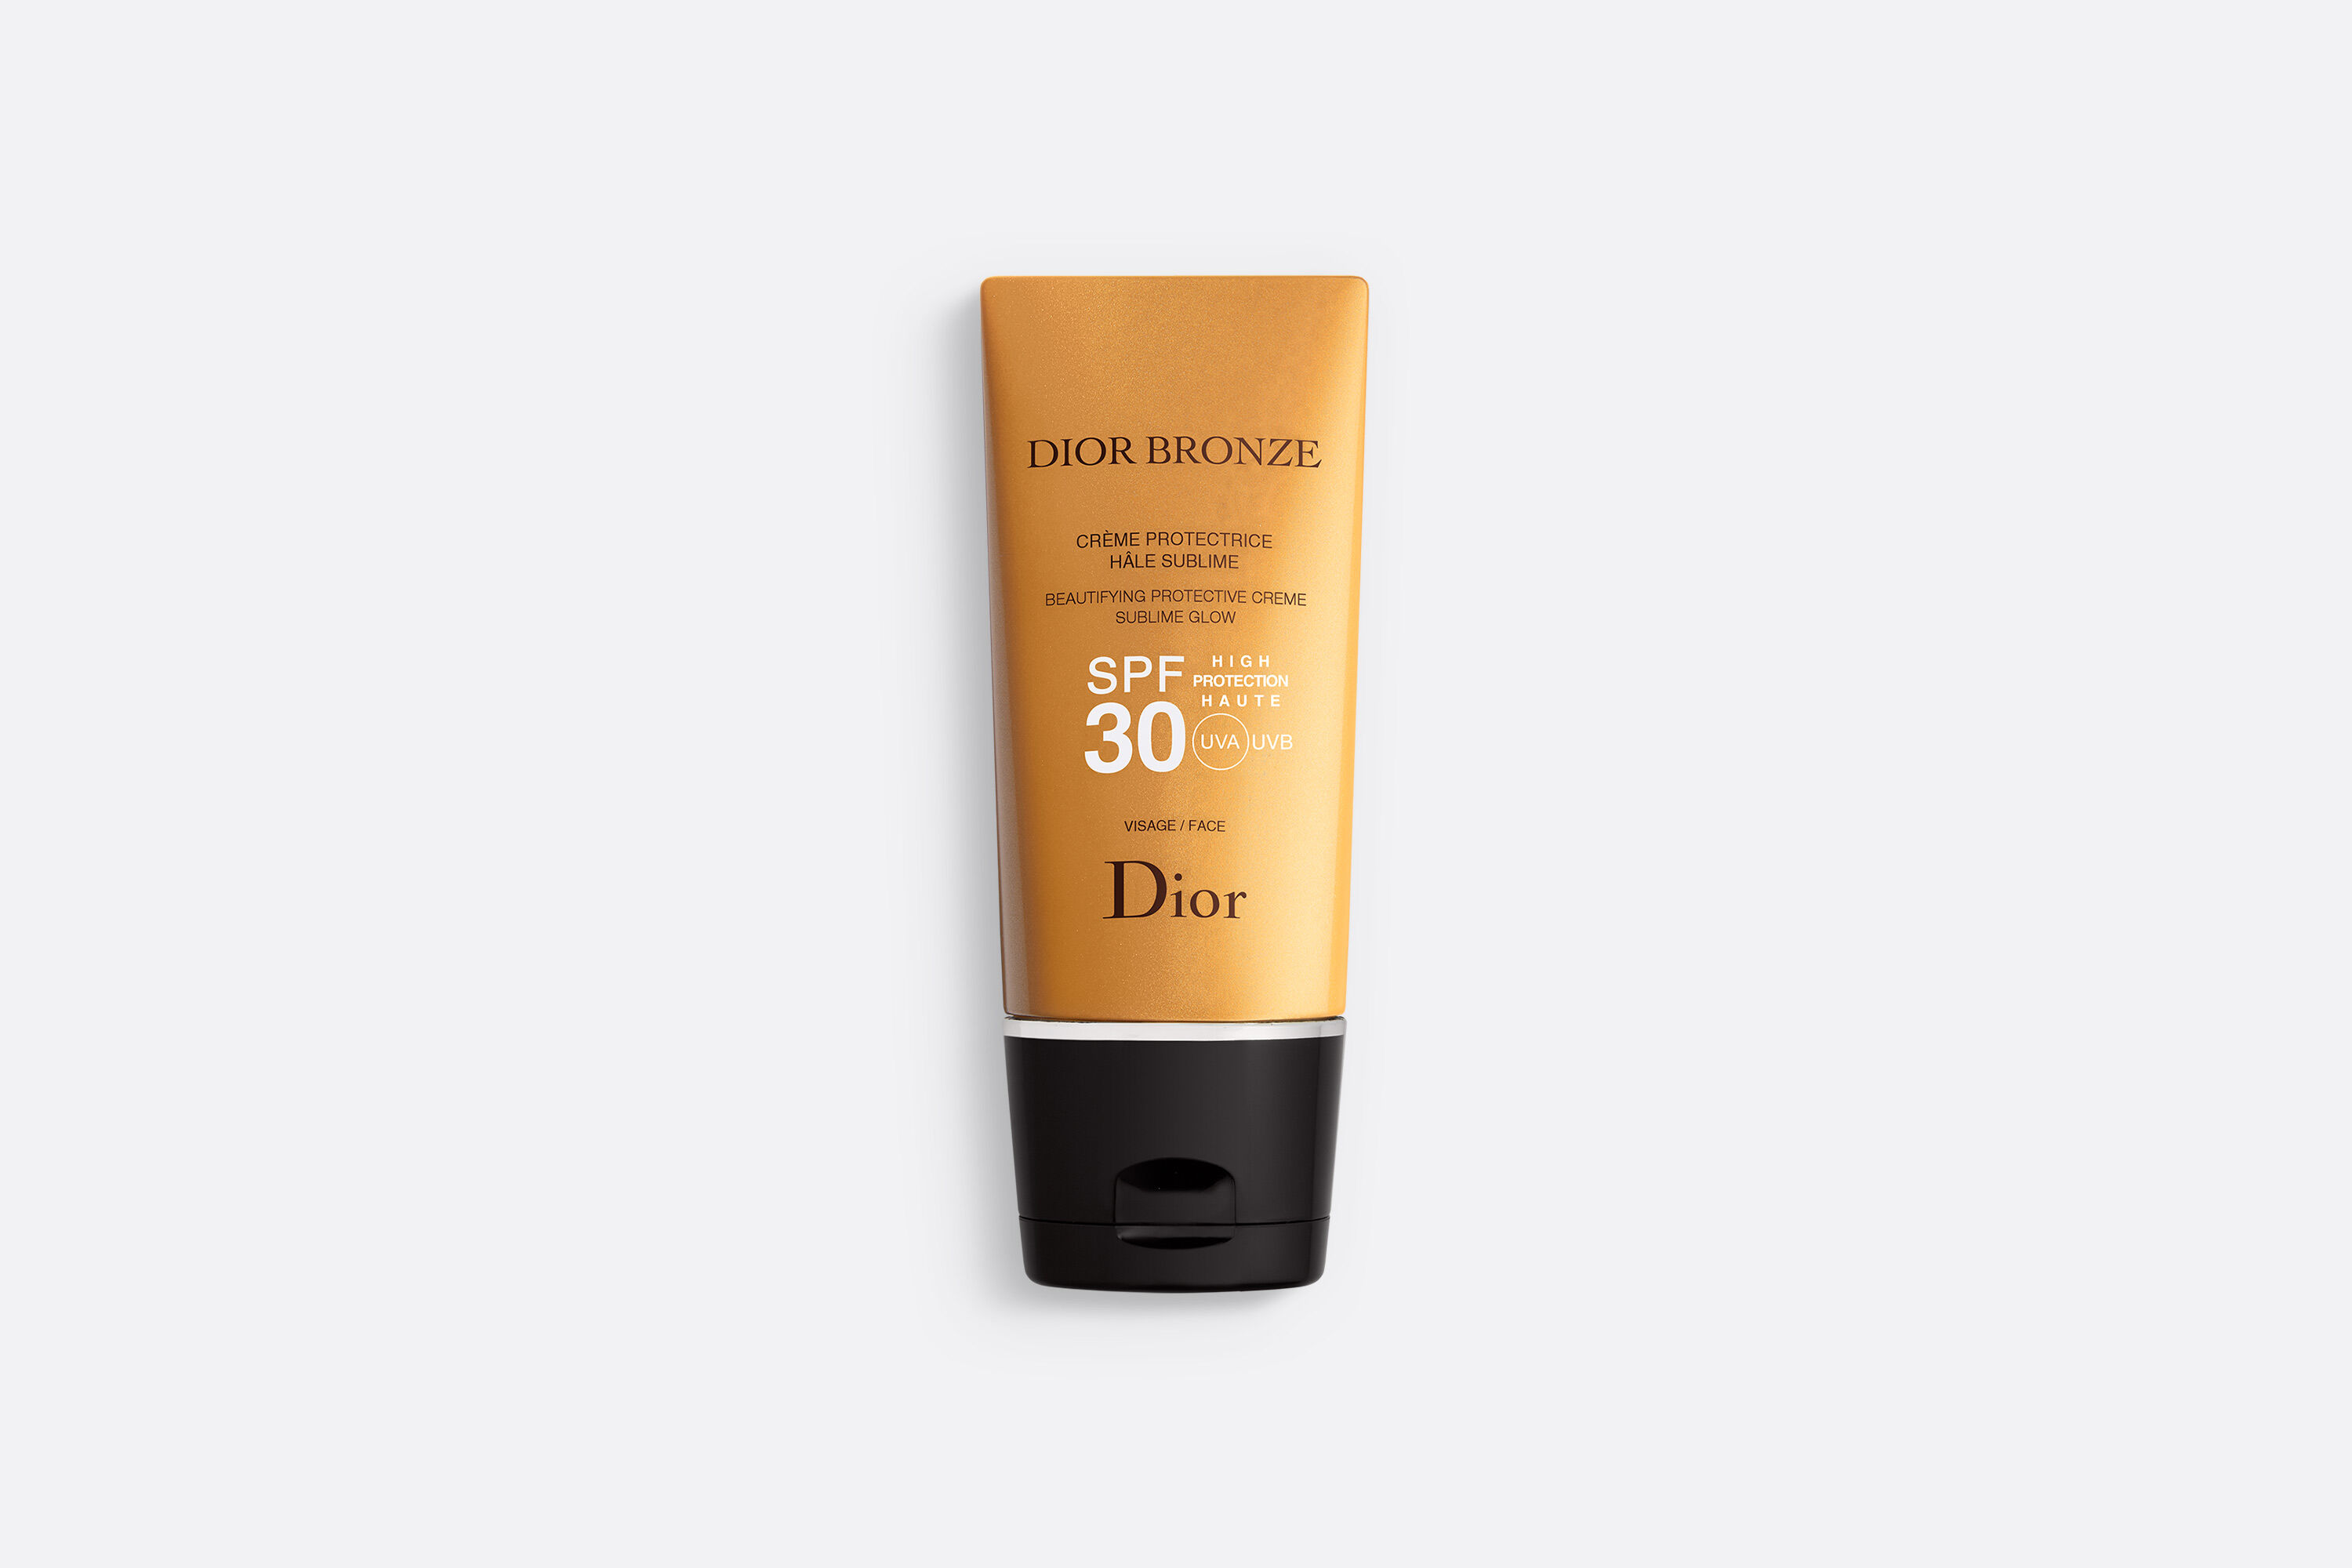 Sun Protection: Dior Bronze Beautifying Protective Sublime Glow - SPF - Face | DIOR